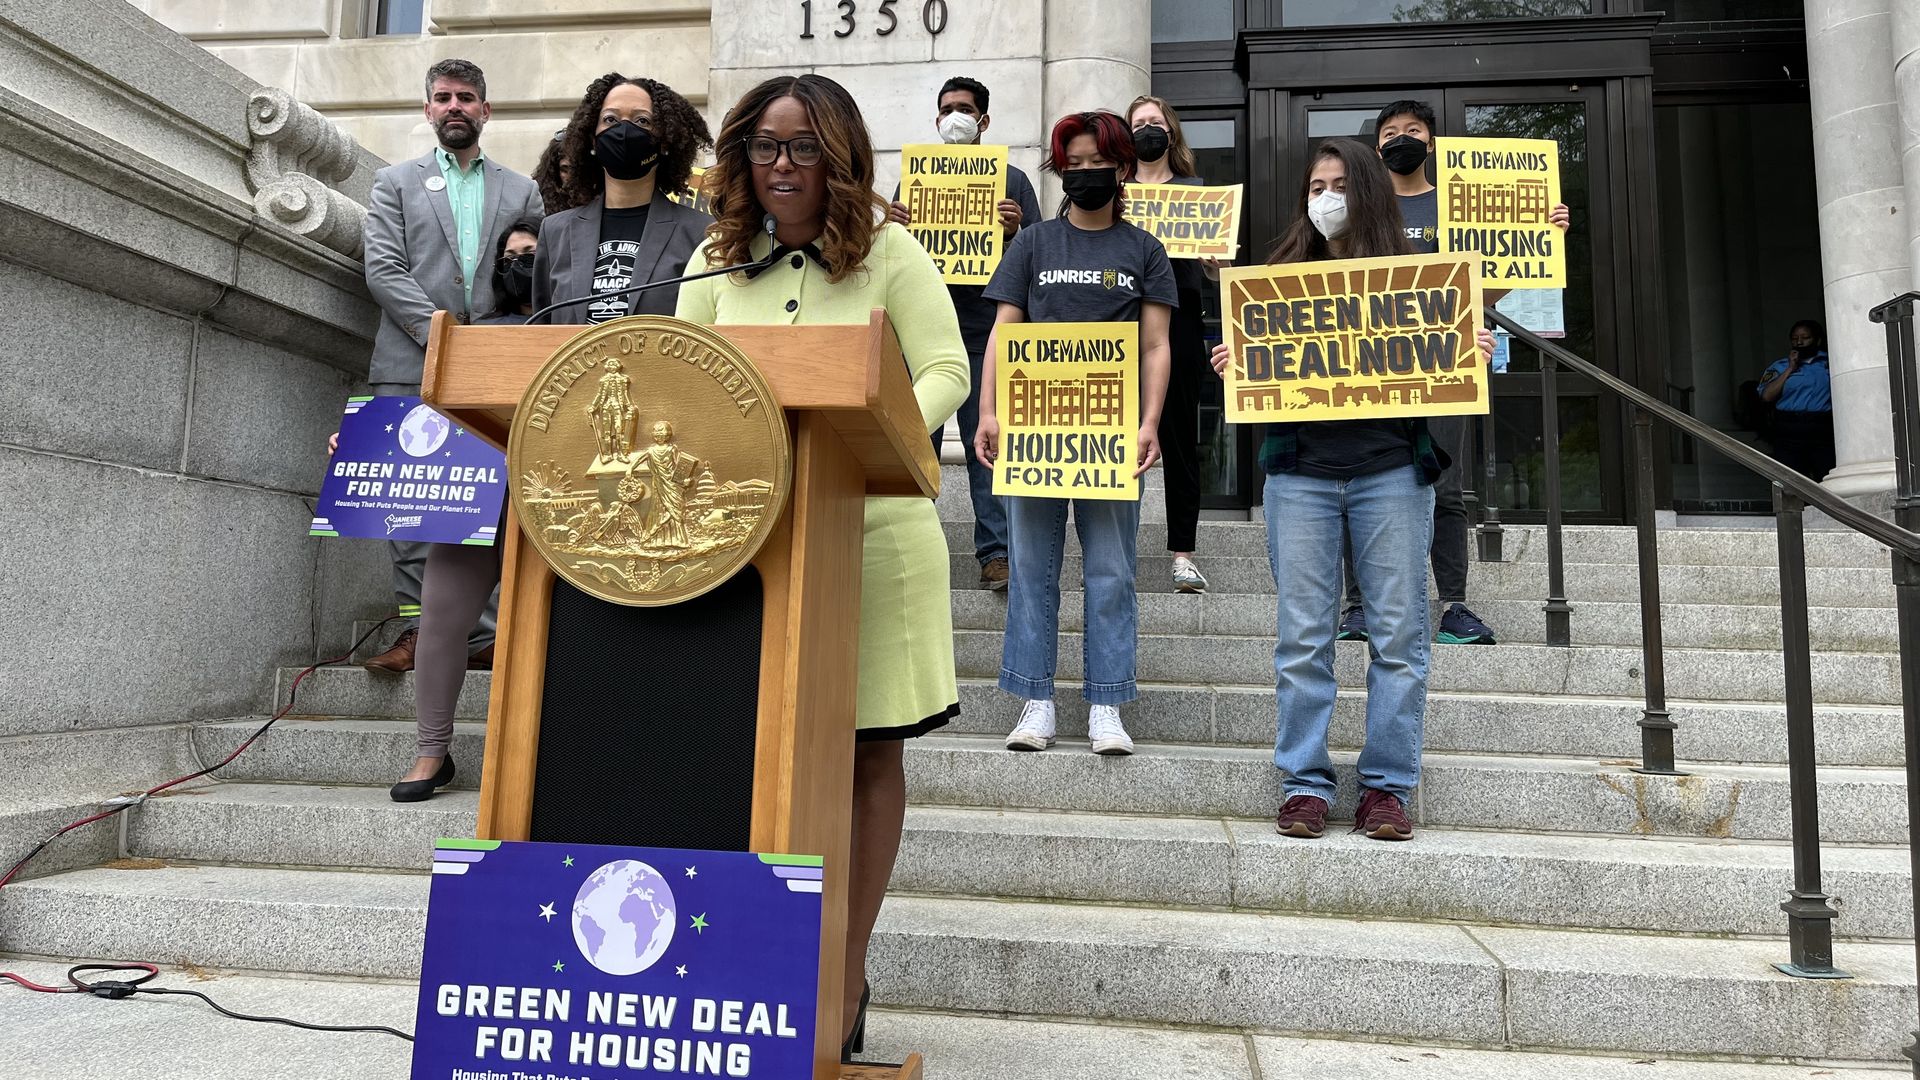 Janeese Lewis George stands behind a podium on the steps of a government building with supporters behind her holding signs for Green New Deal